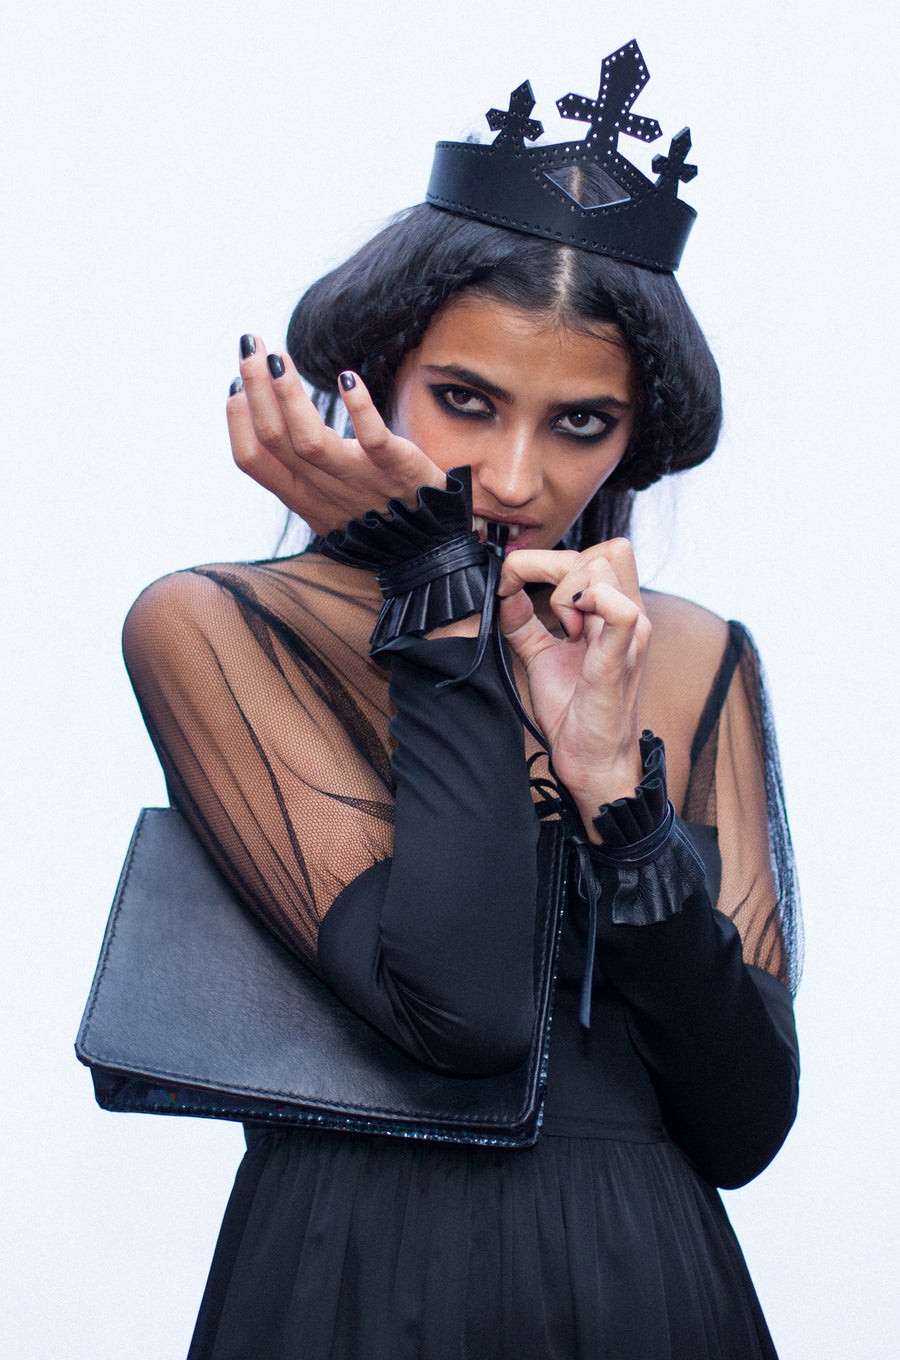 Karina T. IMG Model Edwardian Pleated Black Leather Wrist Cuffs Wendy Nichol Designer Handmade in NYC Victorian Gothic Leather Suede Bow Pleated Cuffs Saints of the Zodiac Fashion Show SS14